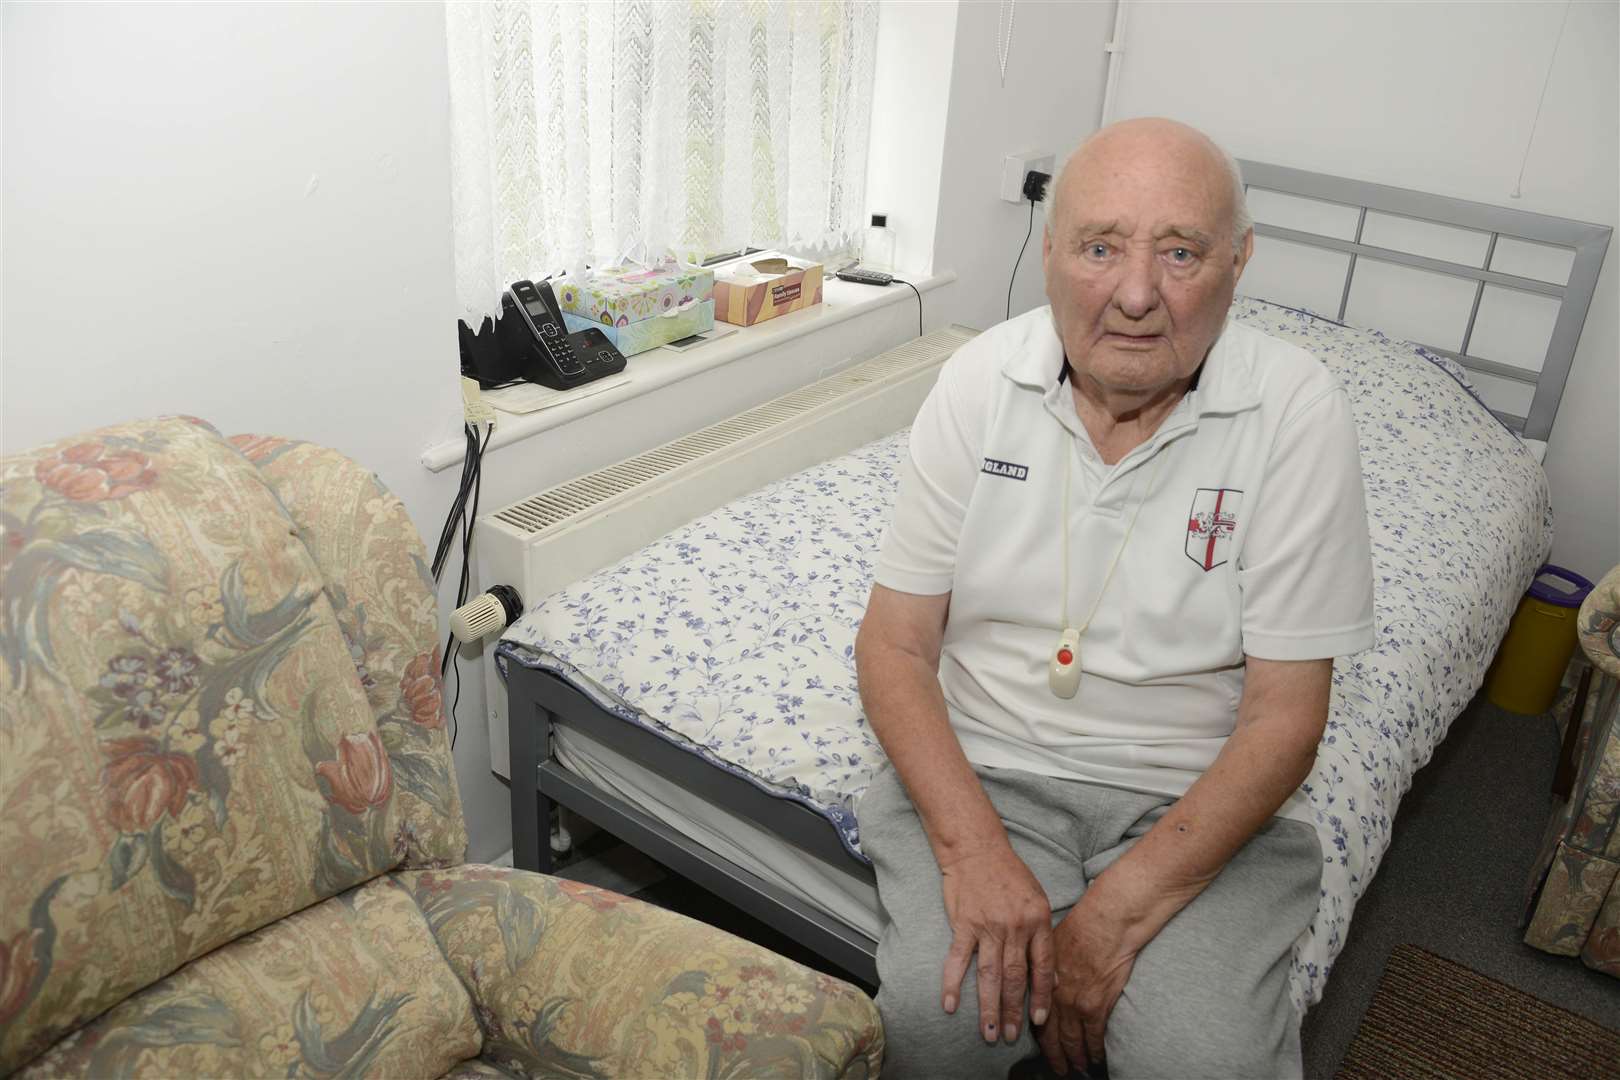 Mittell Court resident Reginald Mooby with one of the radiators that doesn't work properly. Picture: Paul Amos